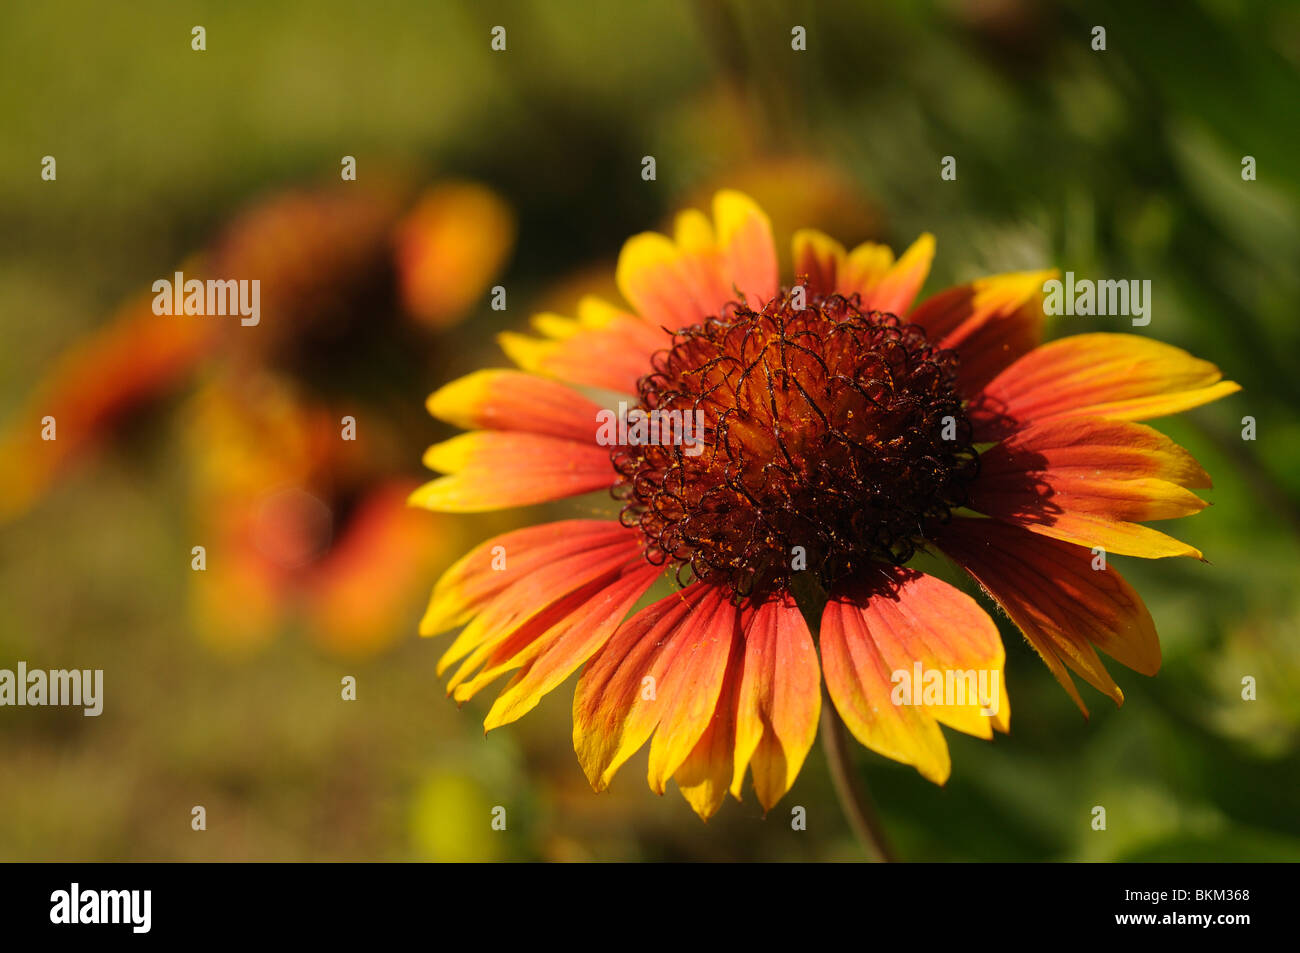 Reichardia picroides. Bicolor flower from daisy family. Stock Photo